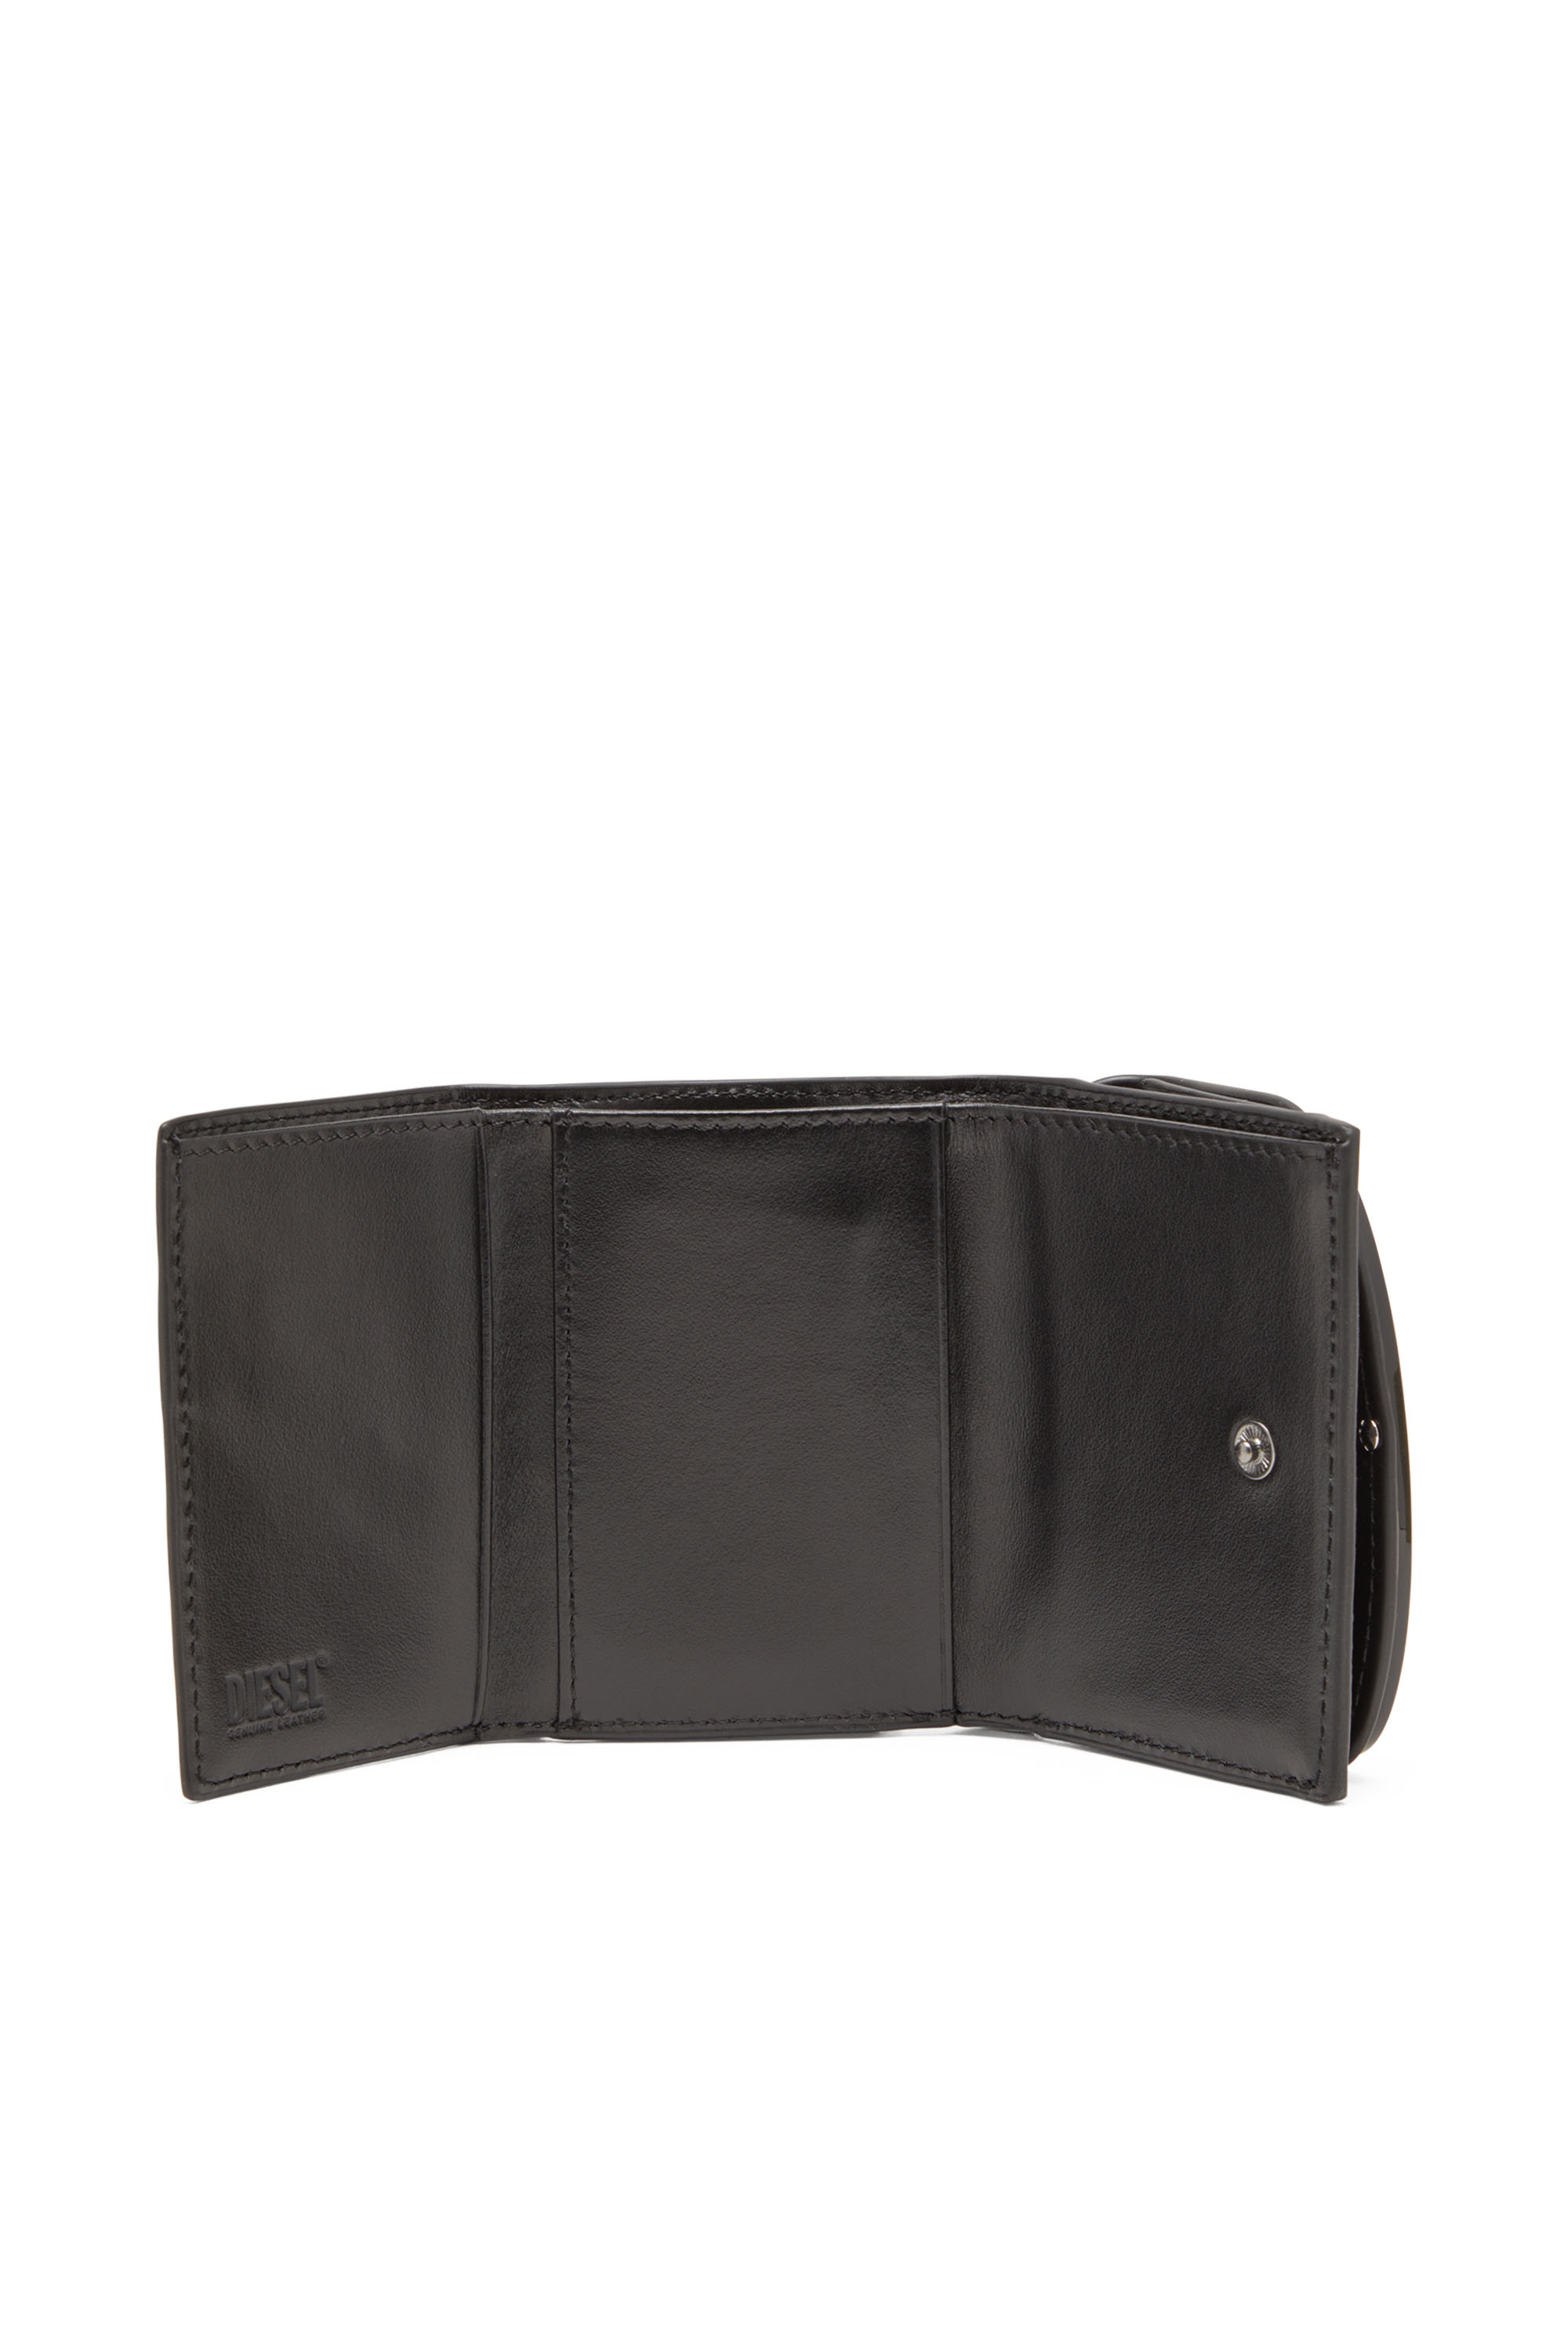 Diesel - 1DR TRI FOLD COIN XS II, Woman Tri-fold wallet in mirrored leather in Black - Image 4